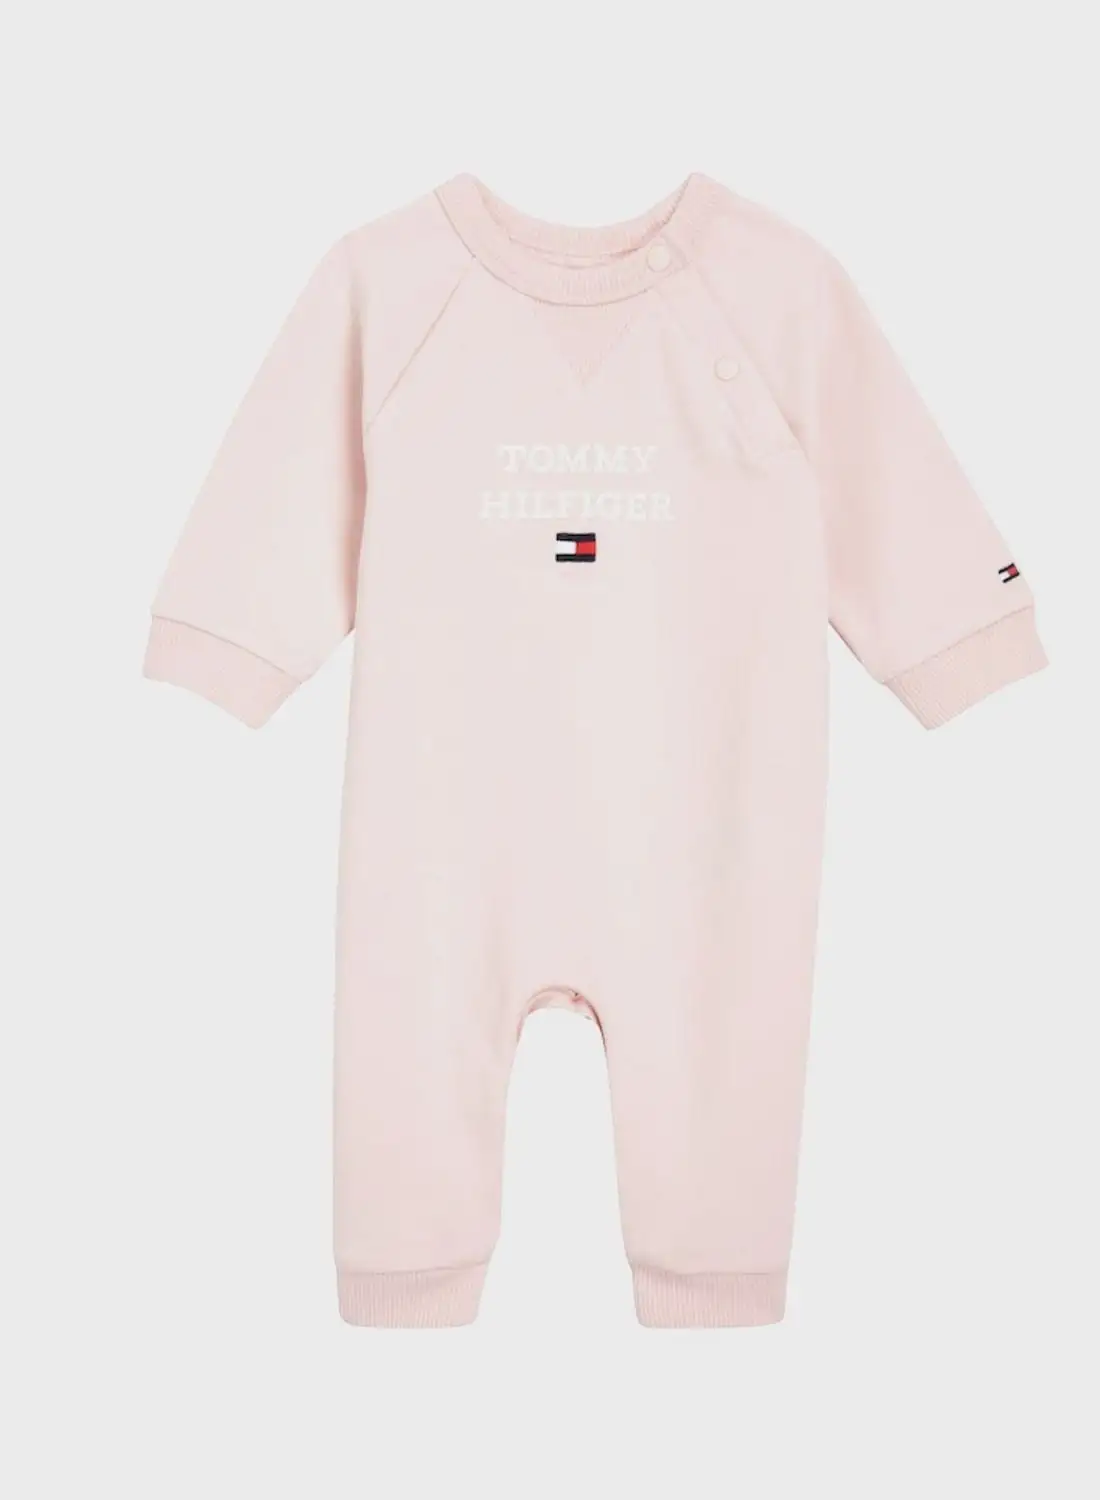 TOMMY HILFIGER Kids Logo Coverall Onesies